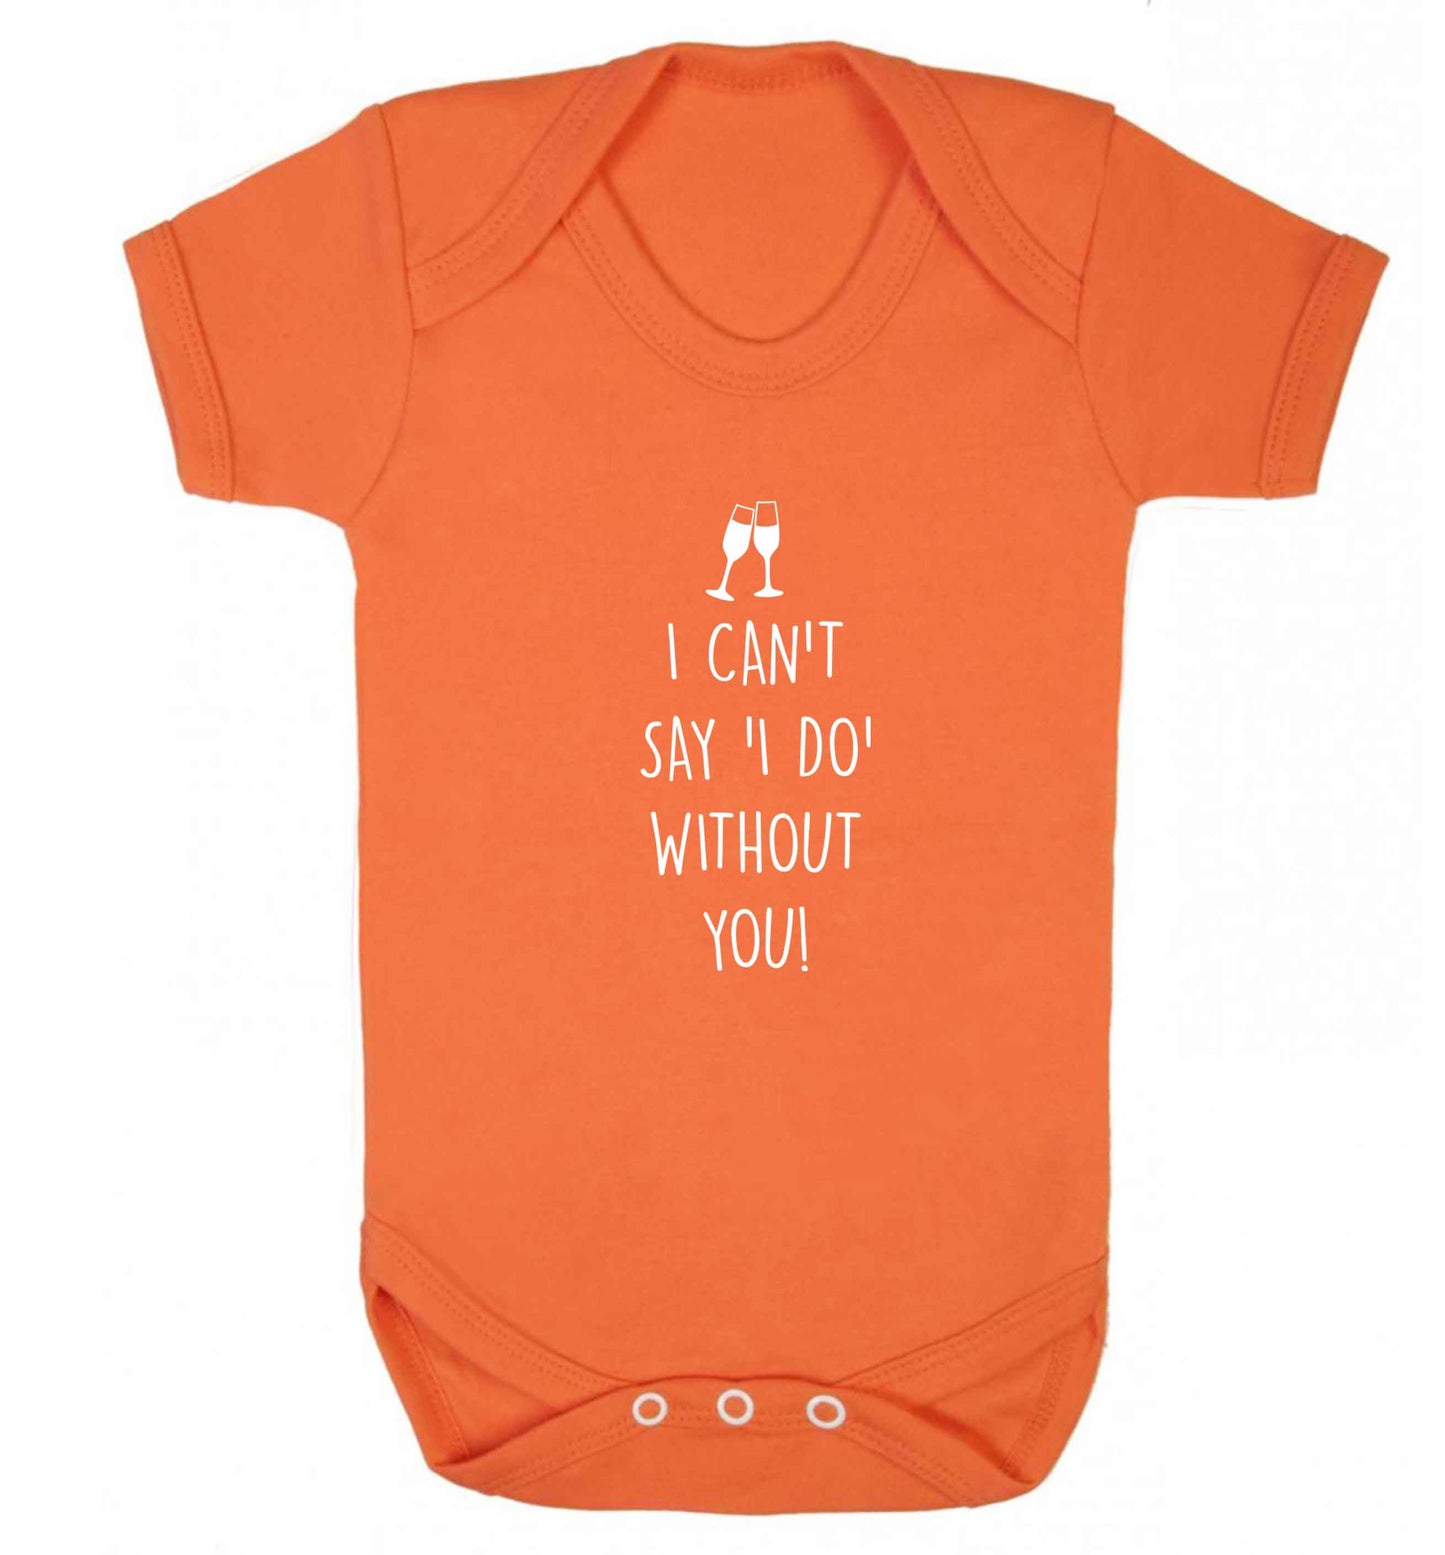 I can't say 'I do' without you! baby vest orange 18-24 months